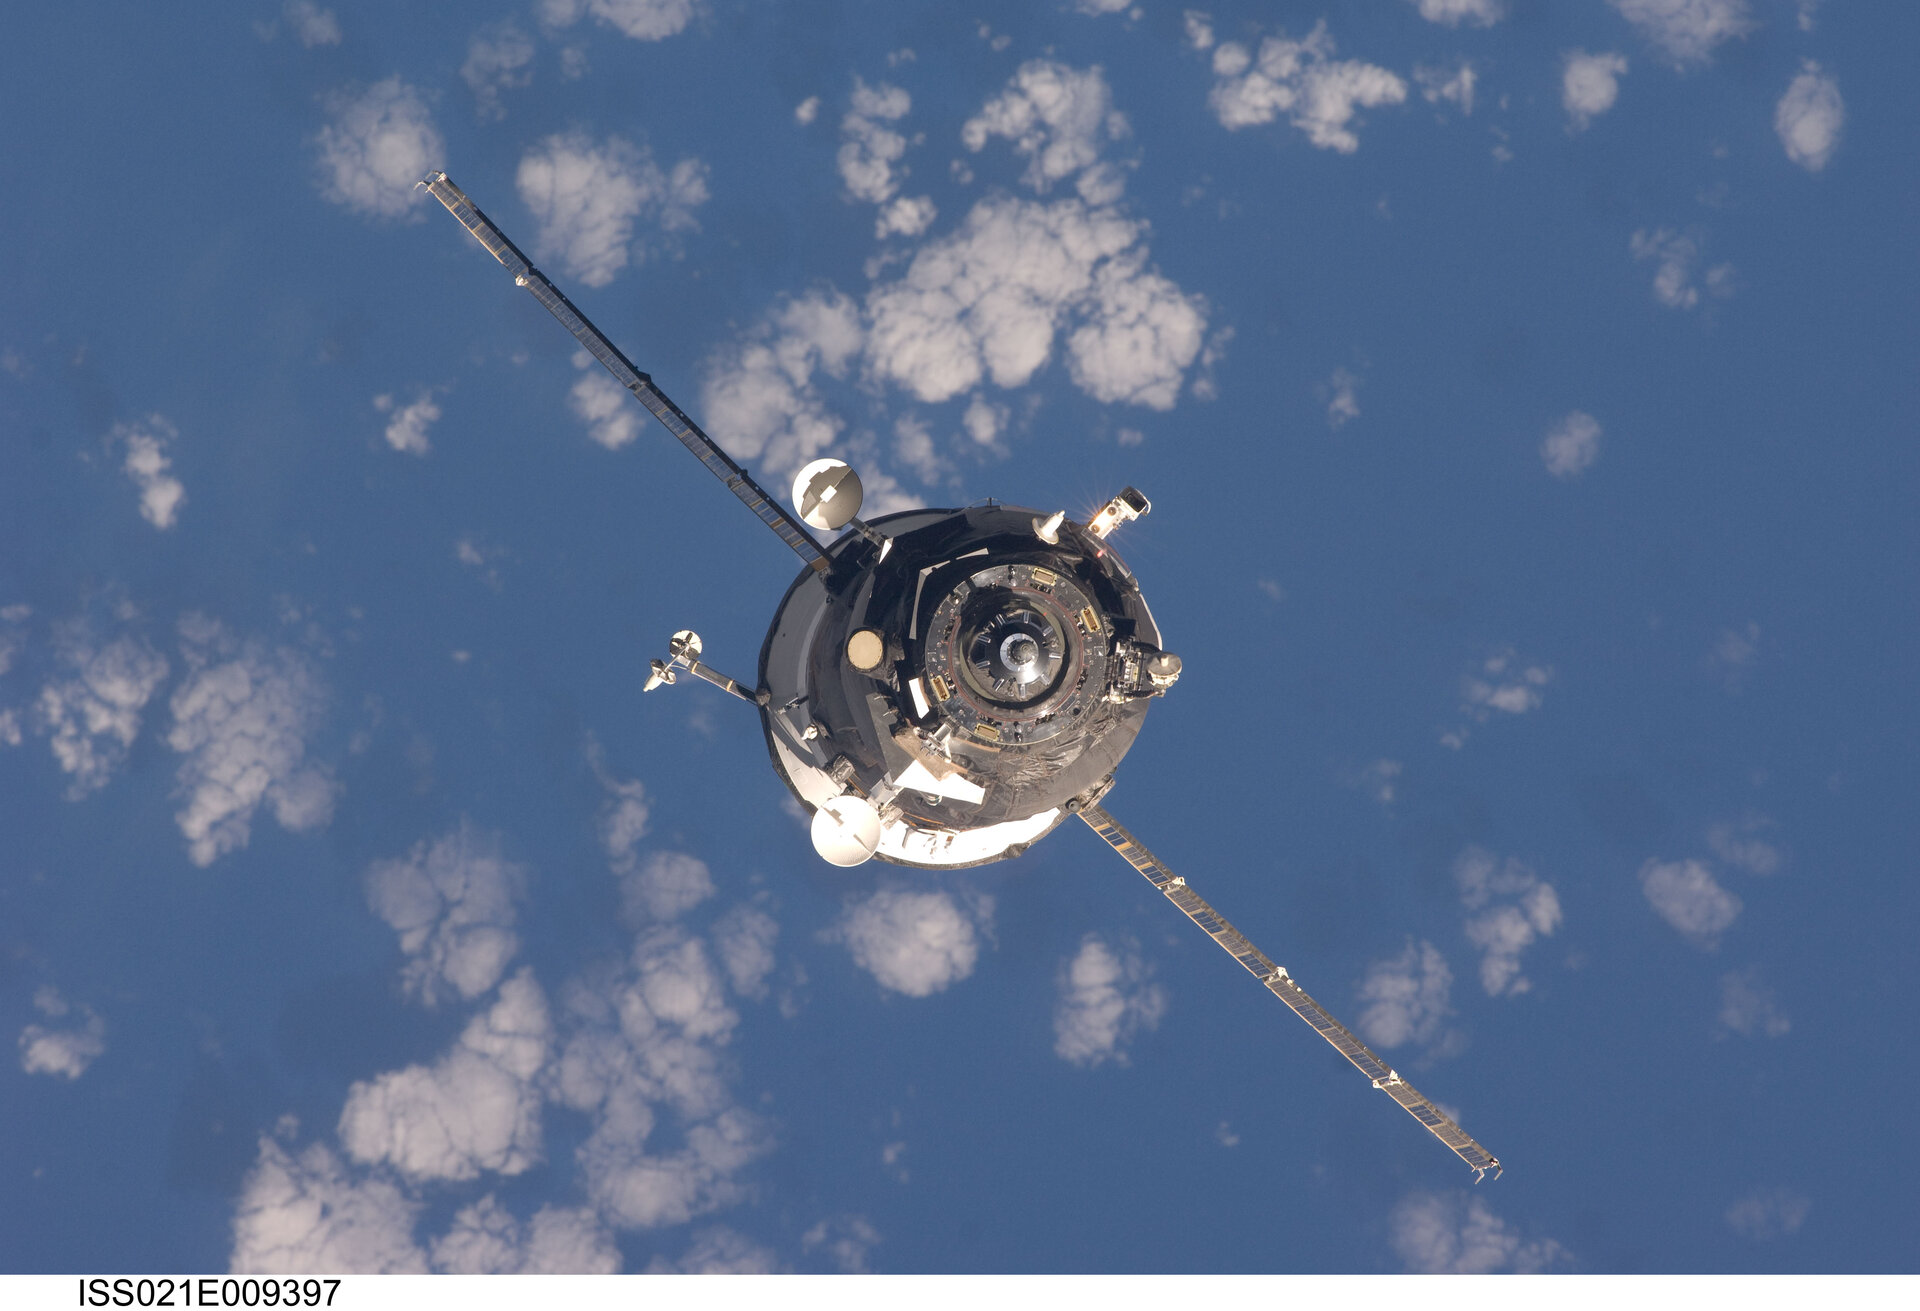 An unpiloted Progress spacecraft approaches the ISS for docking